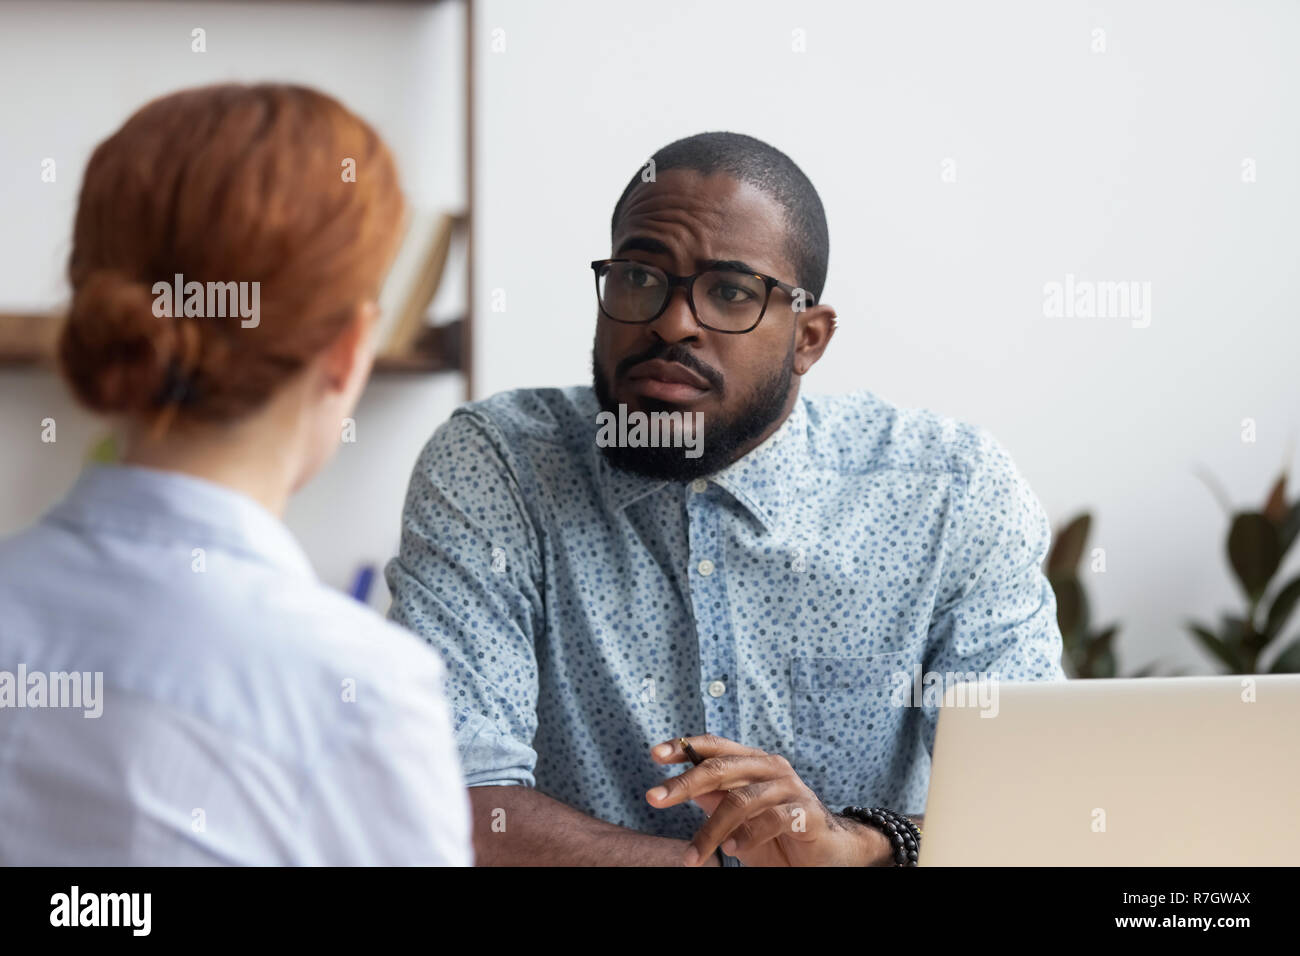 Boss listening candidate female consider her unsuitable for job  Stock Photo